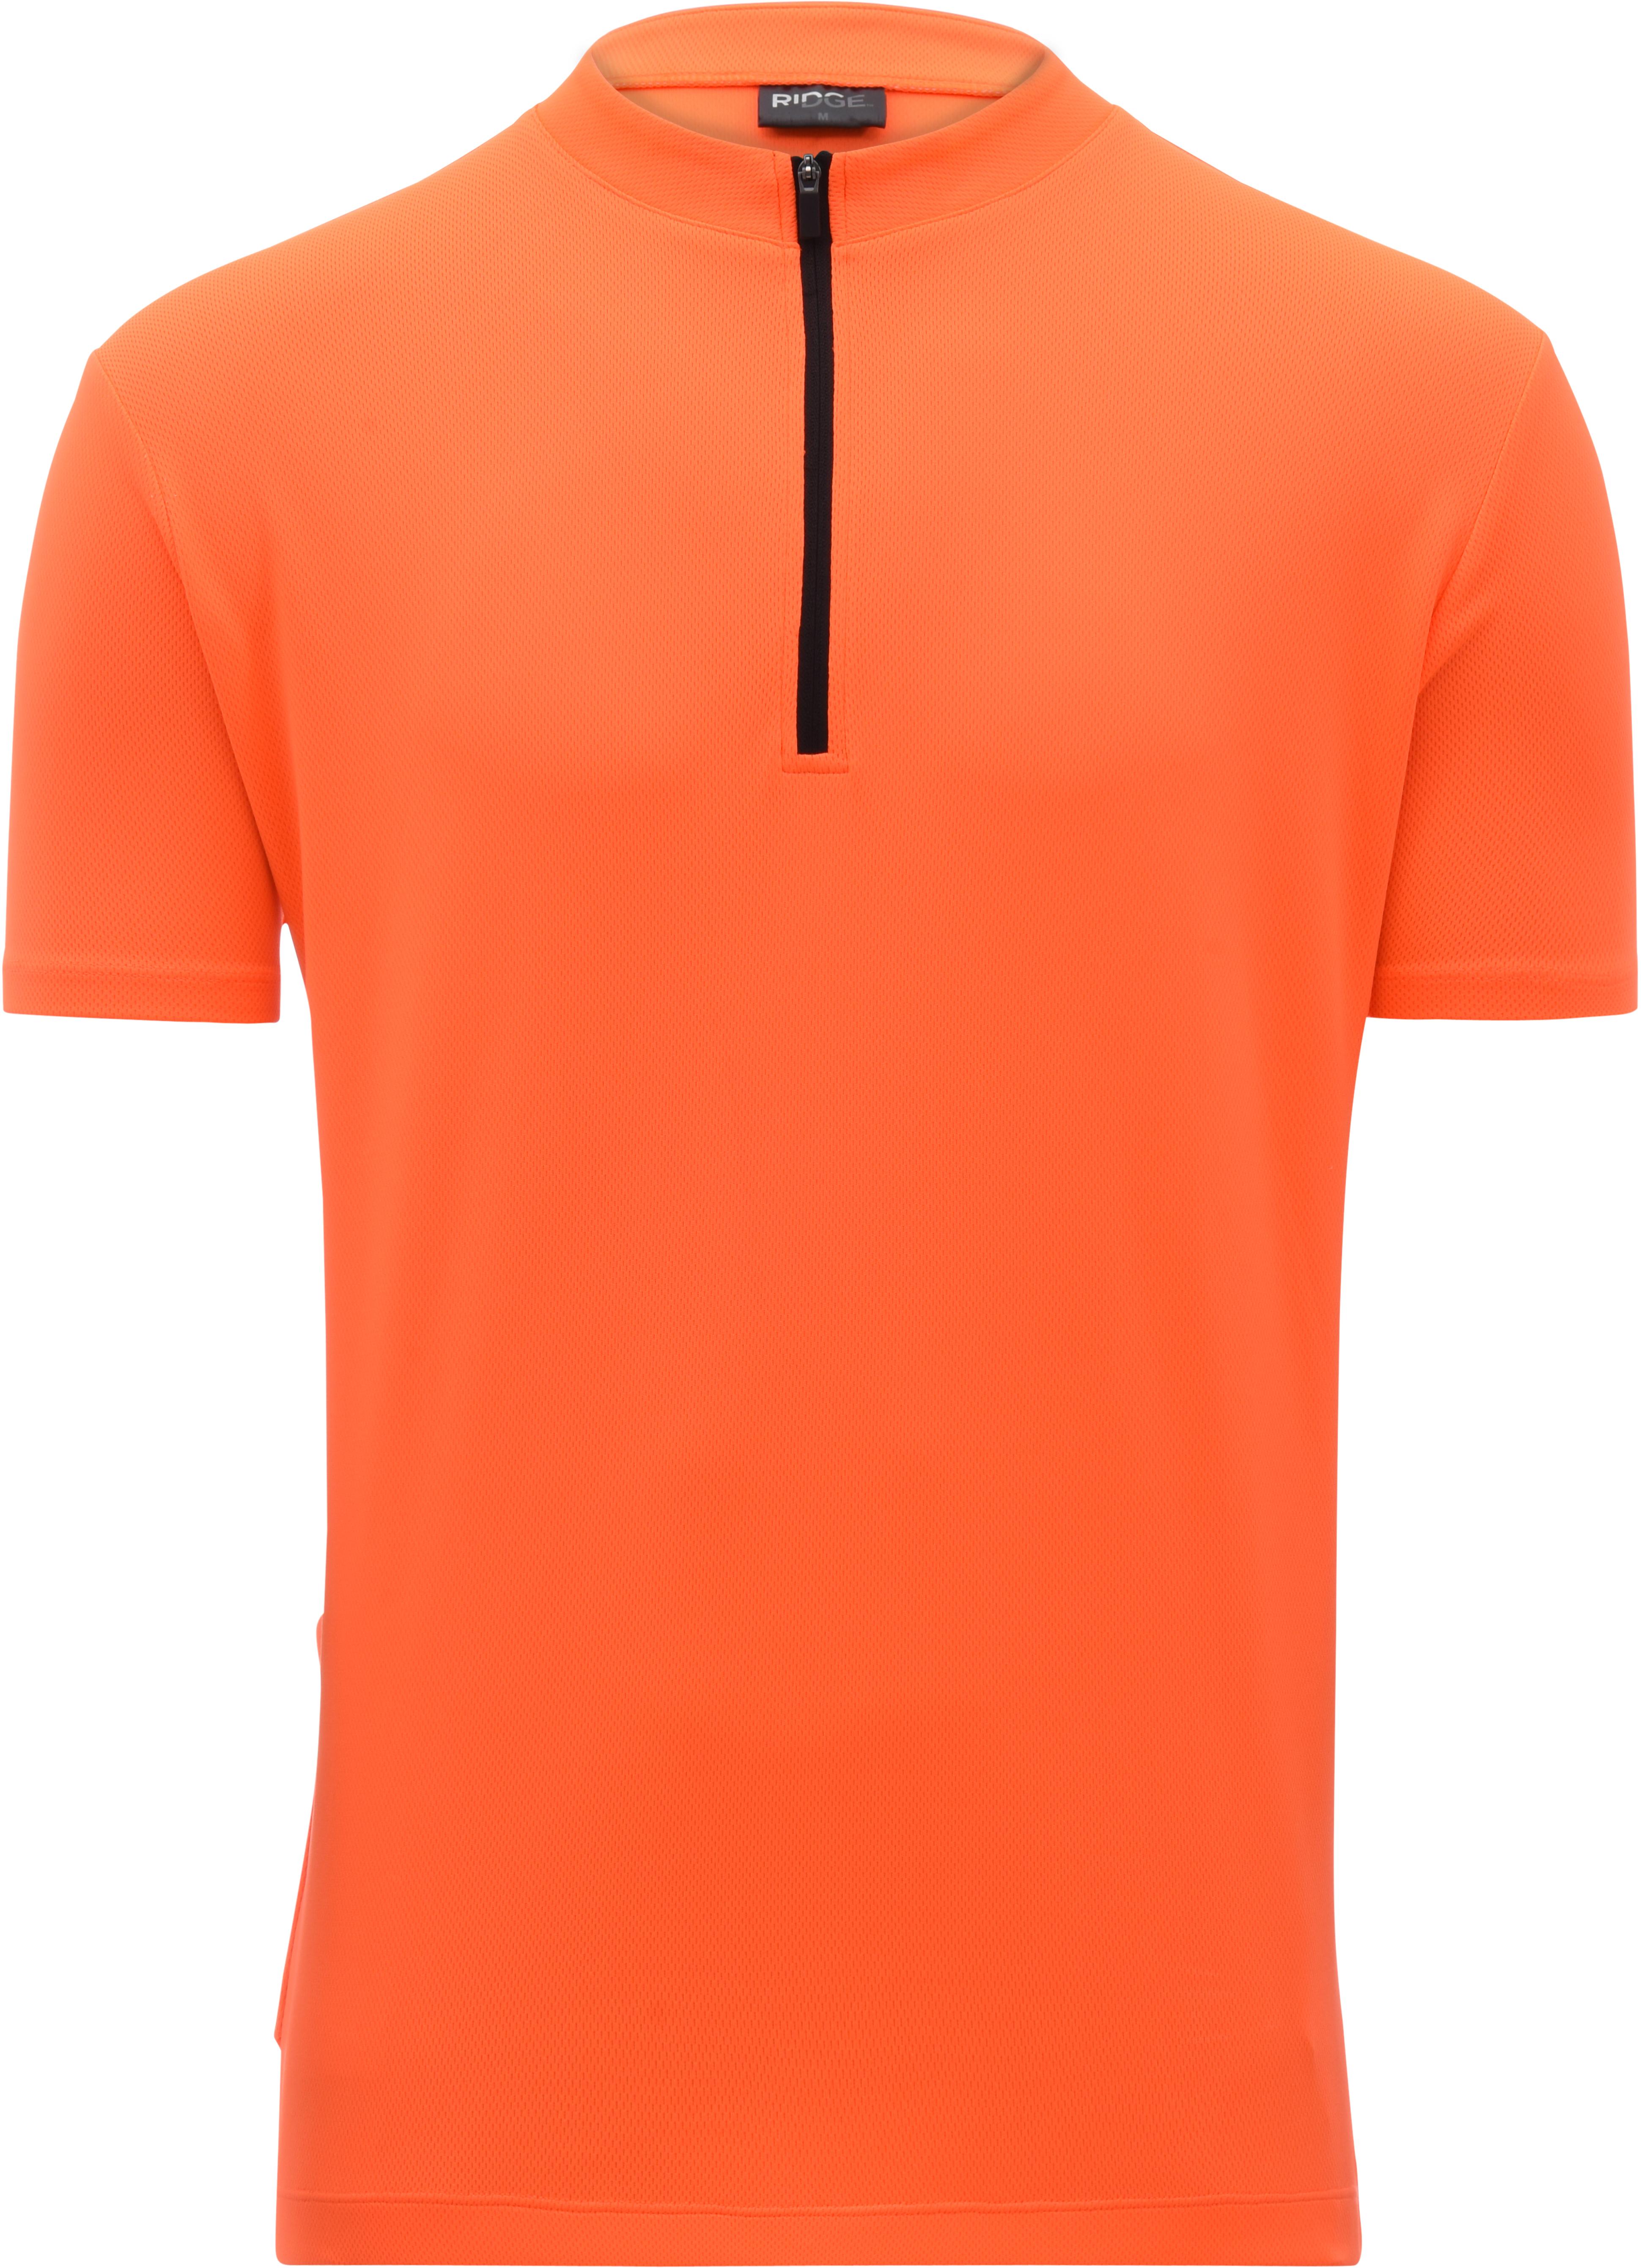 halfords cycle jersey